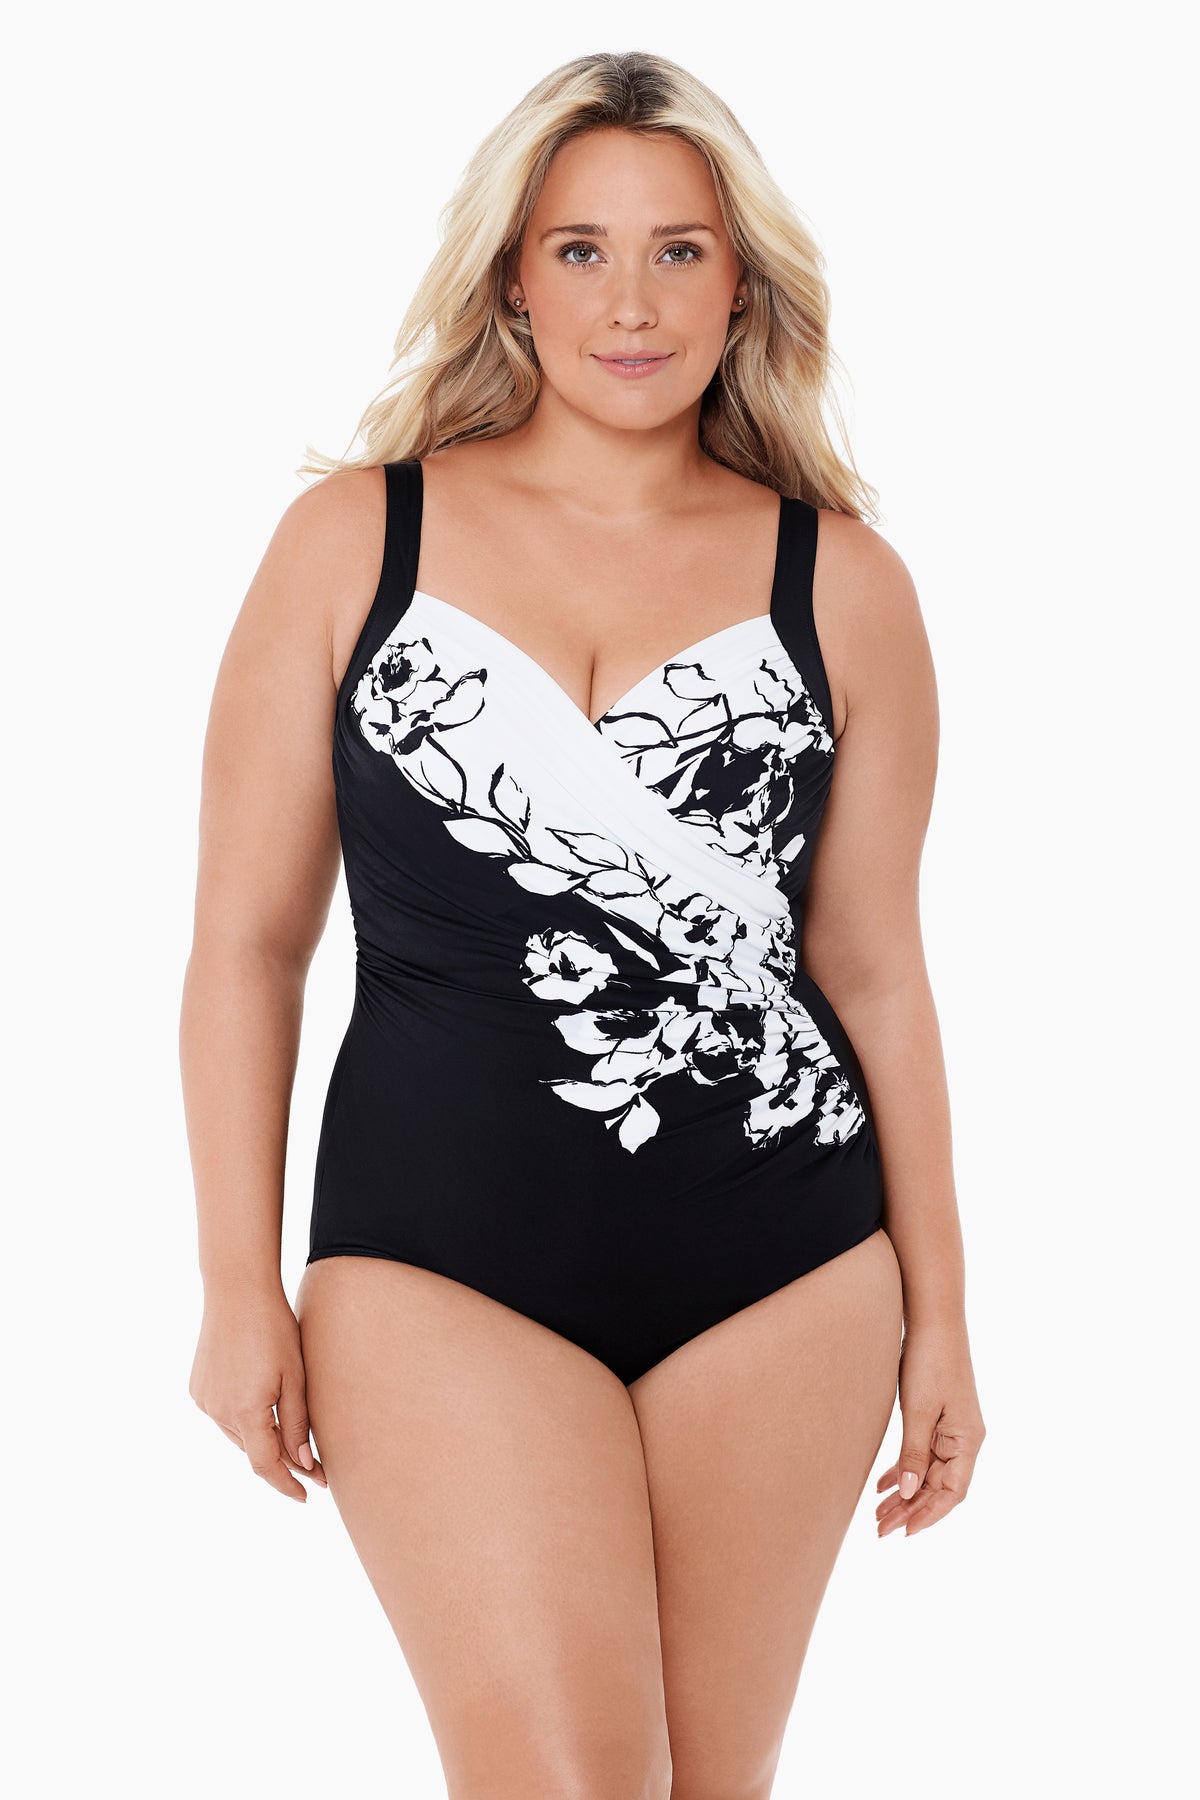 Plus Size One Piece Swimsuits – Miraclesuit